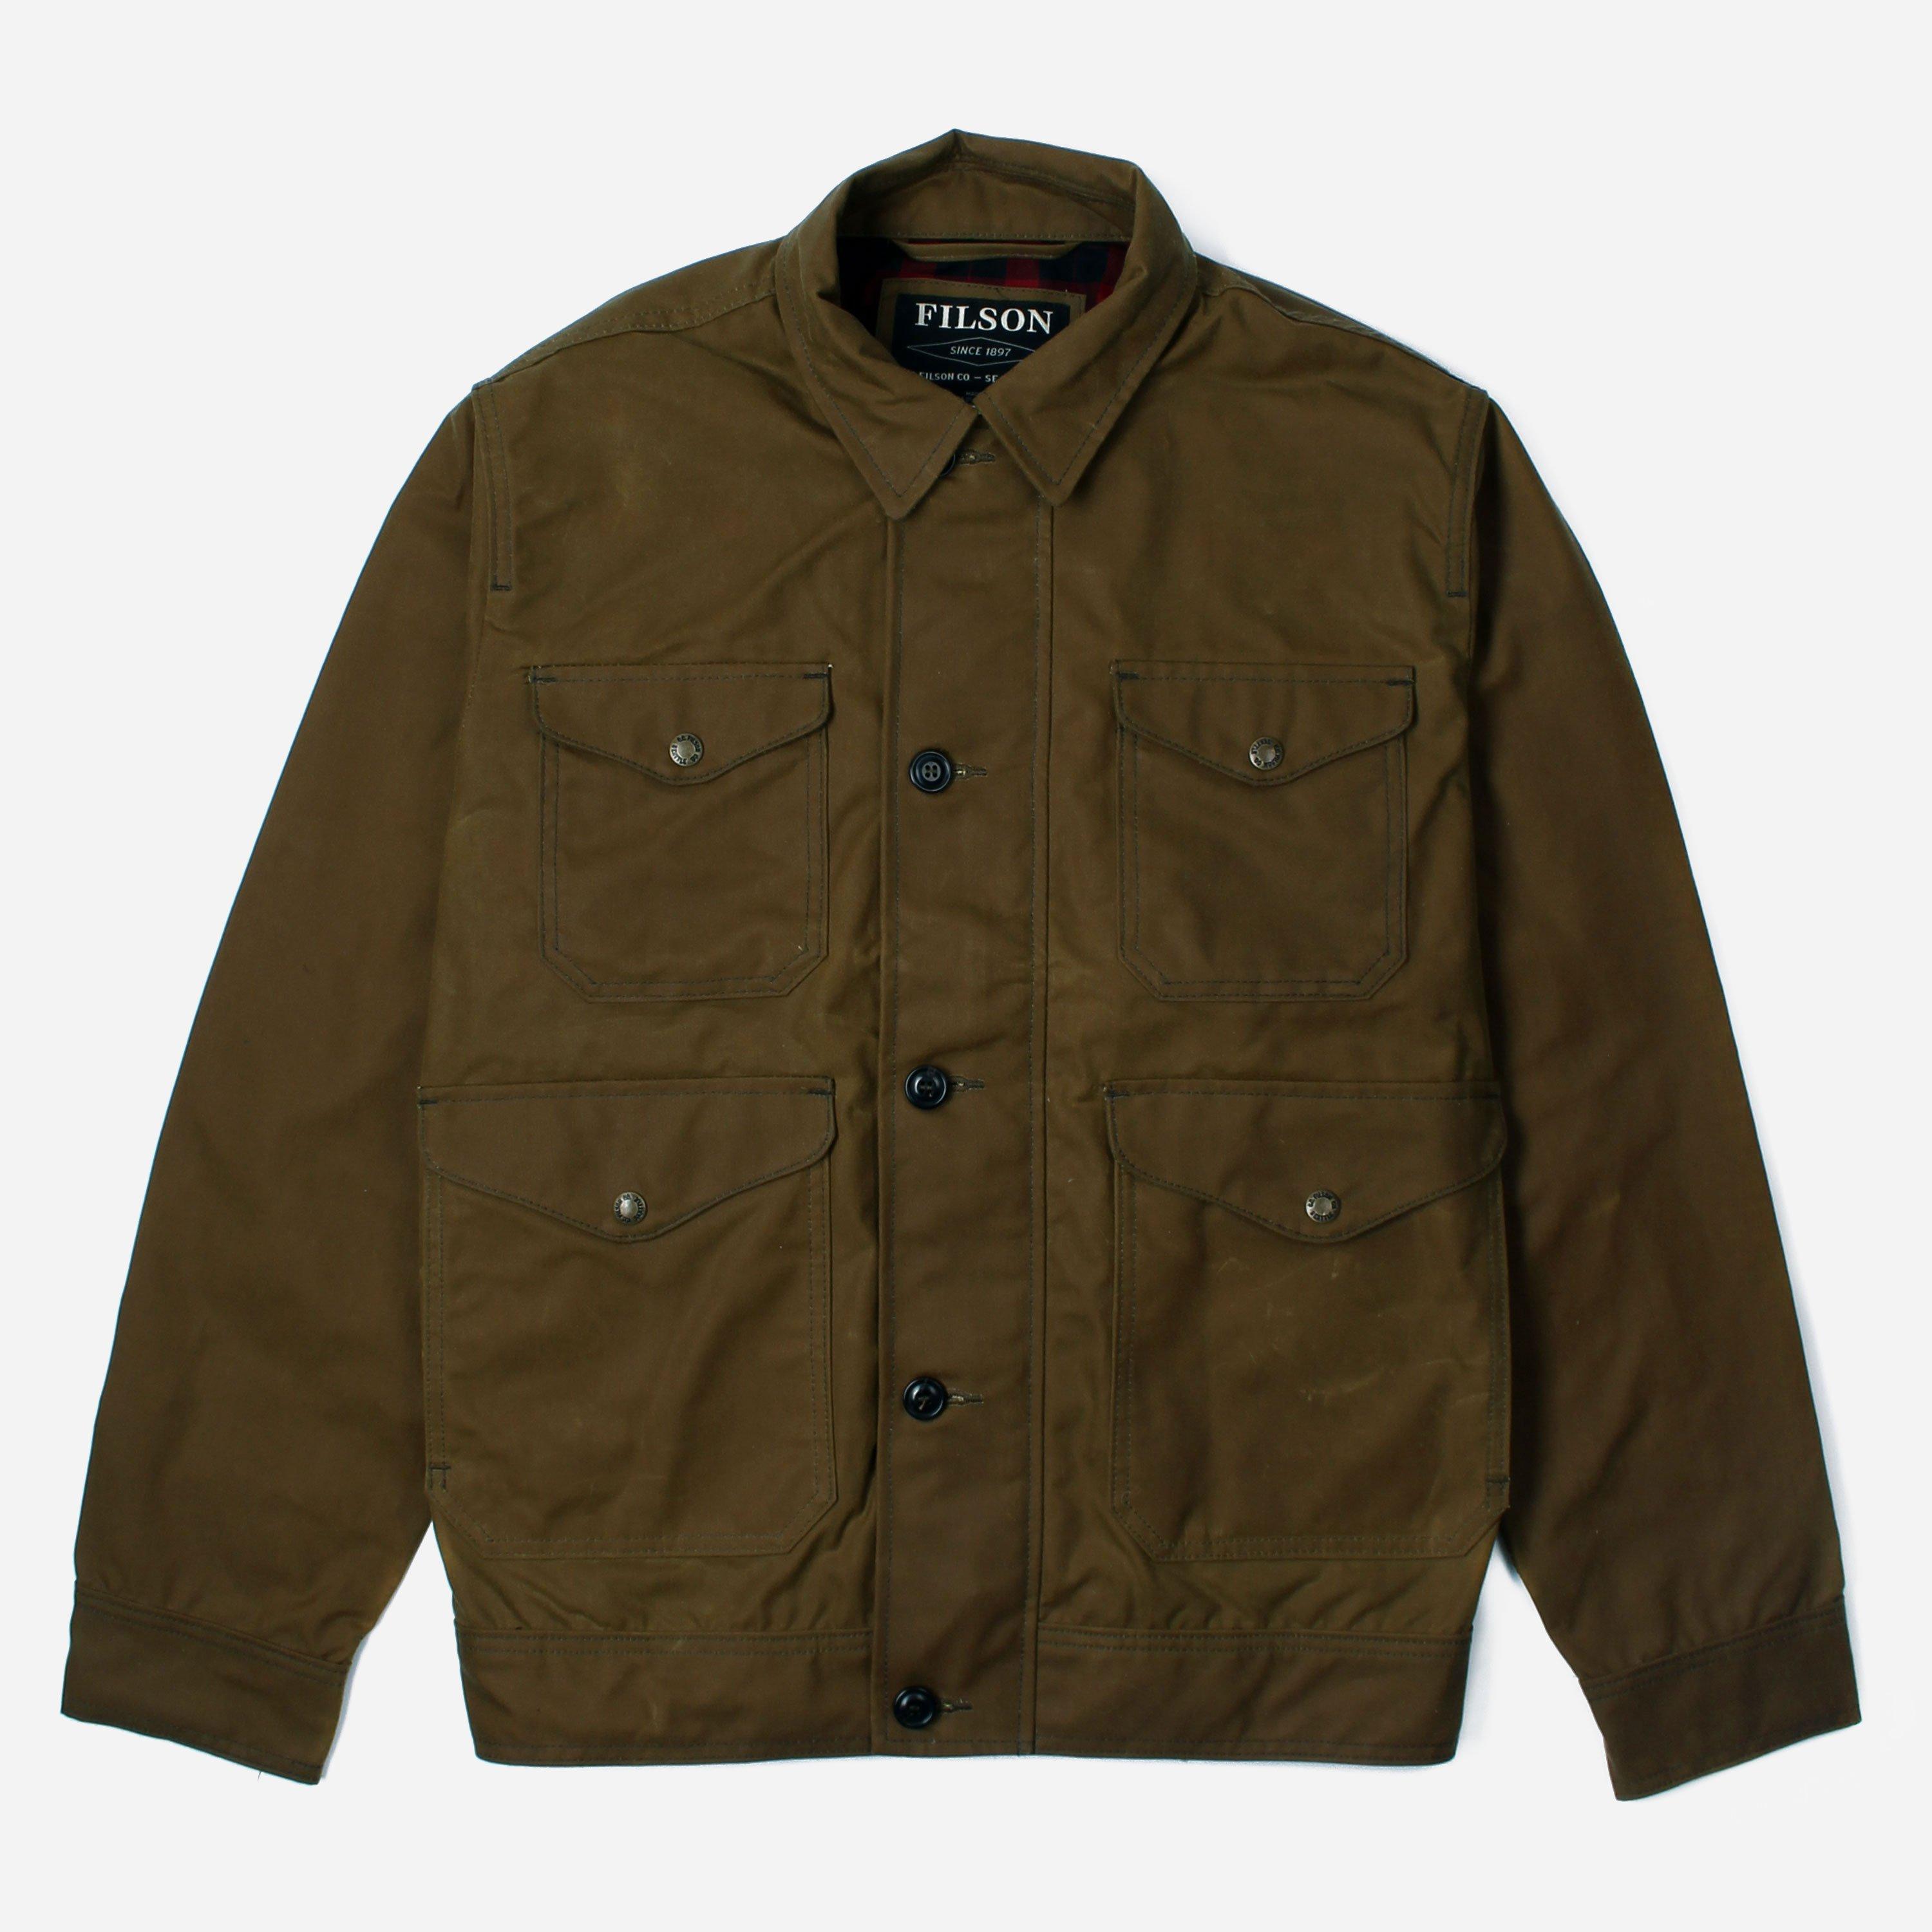 Filson Northway Jacket in Tan (Green) for Men - Save 30% - Lyst